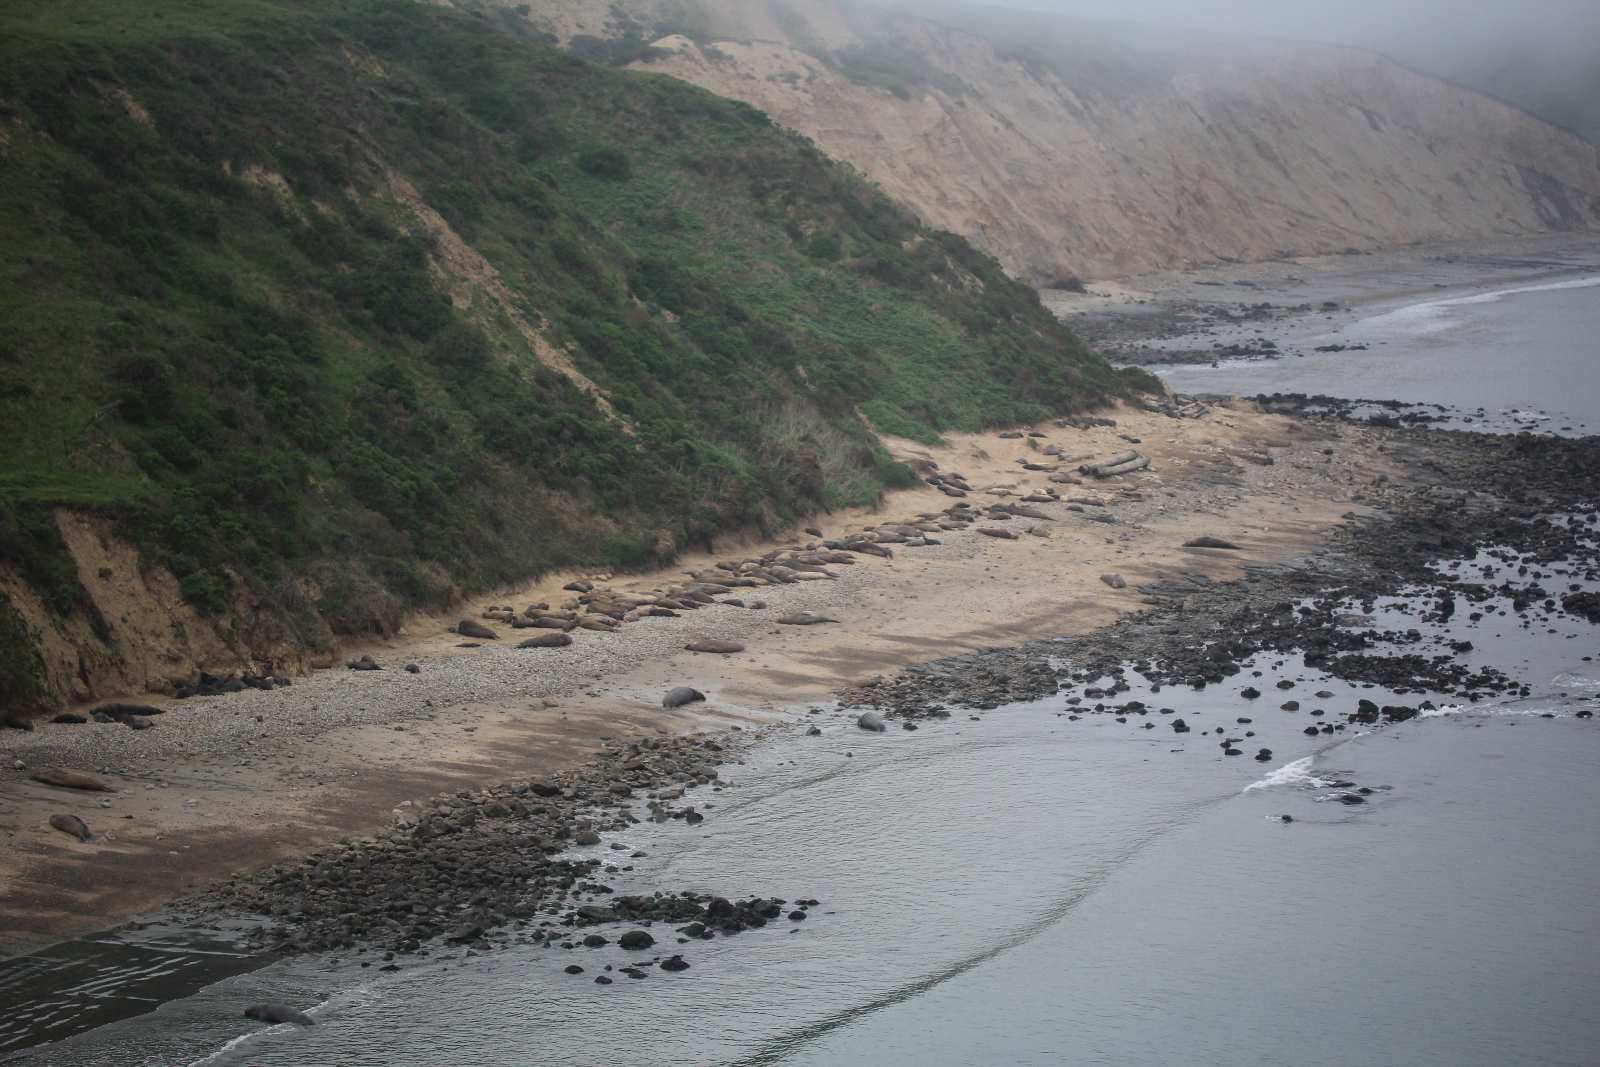 Elephant seals from a distance